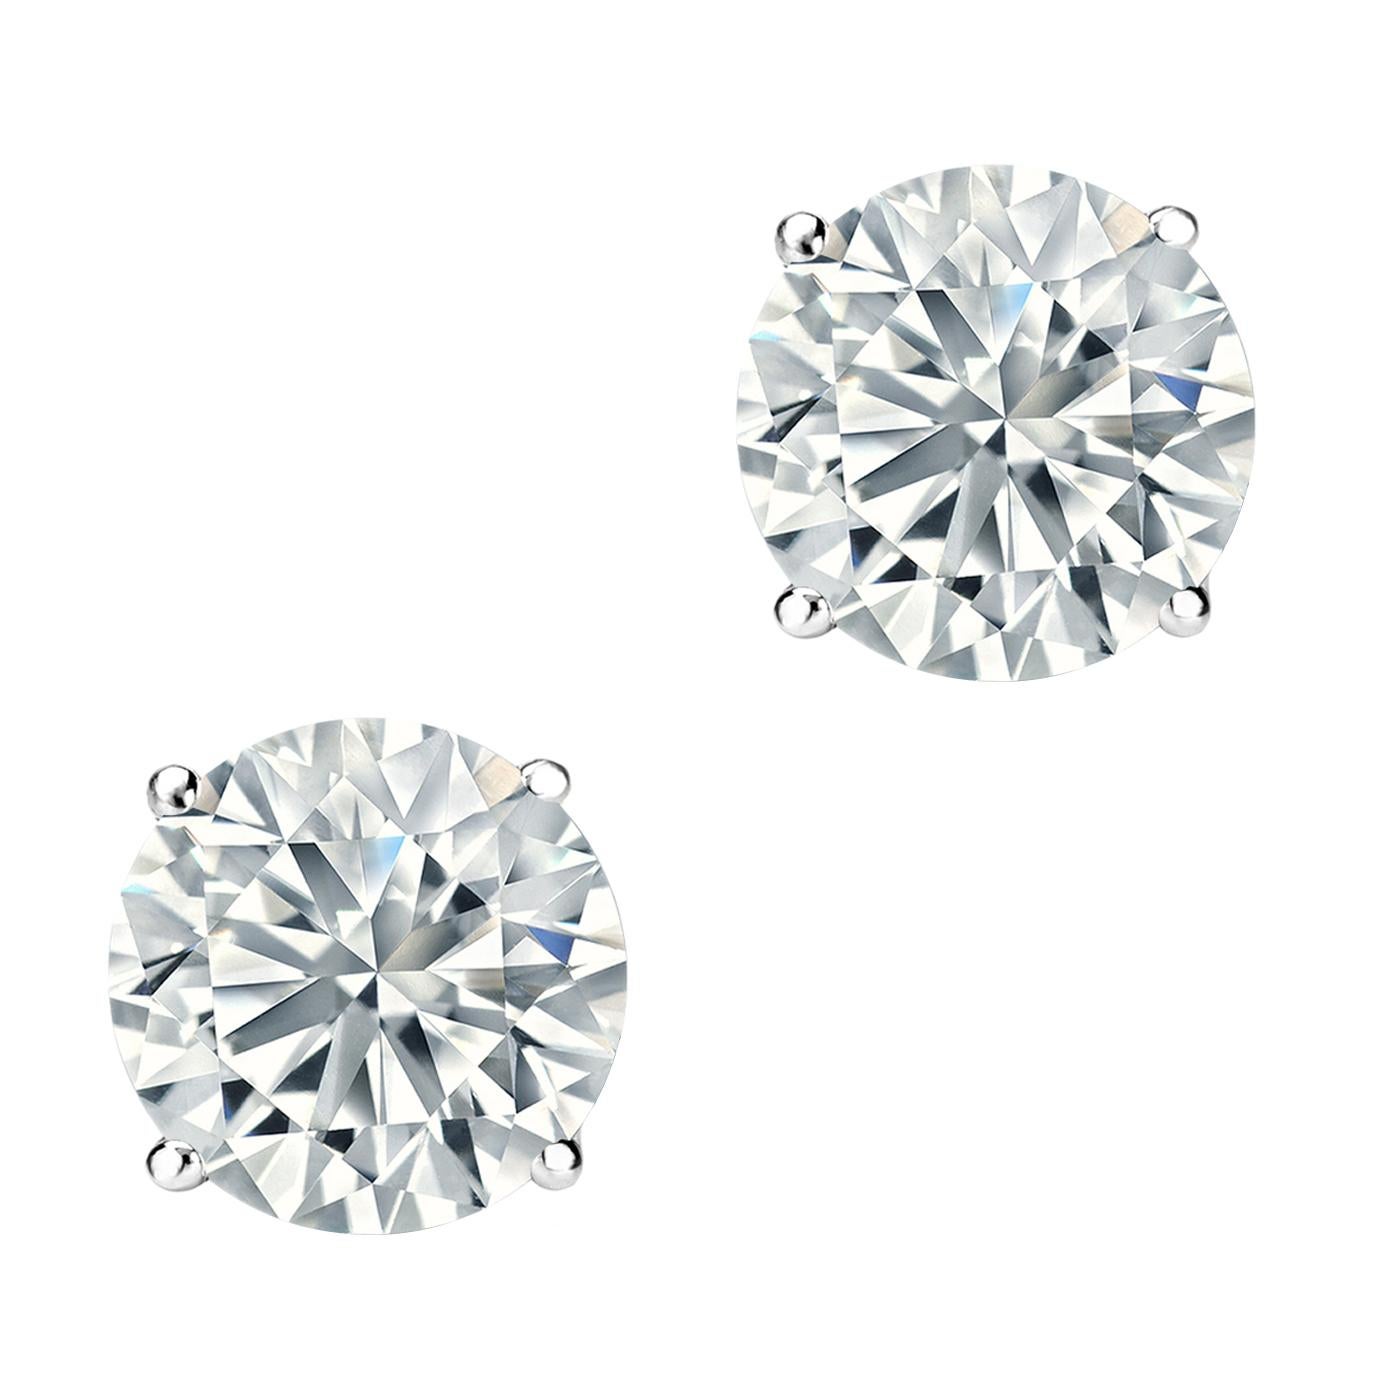 This pair of 2.11-carat diamond Stud Earrings is a MUST-HAVE. Elegant and gleaming Round cut diamonds are set on an elegant 4-prong Martini style setting. All diamonds are Natural, It's an earring that you can wear in any occasion and goes well with